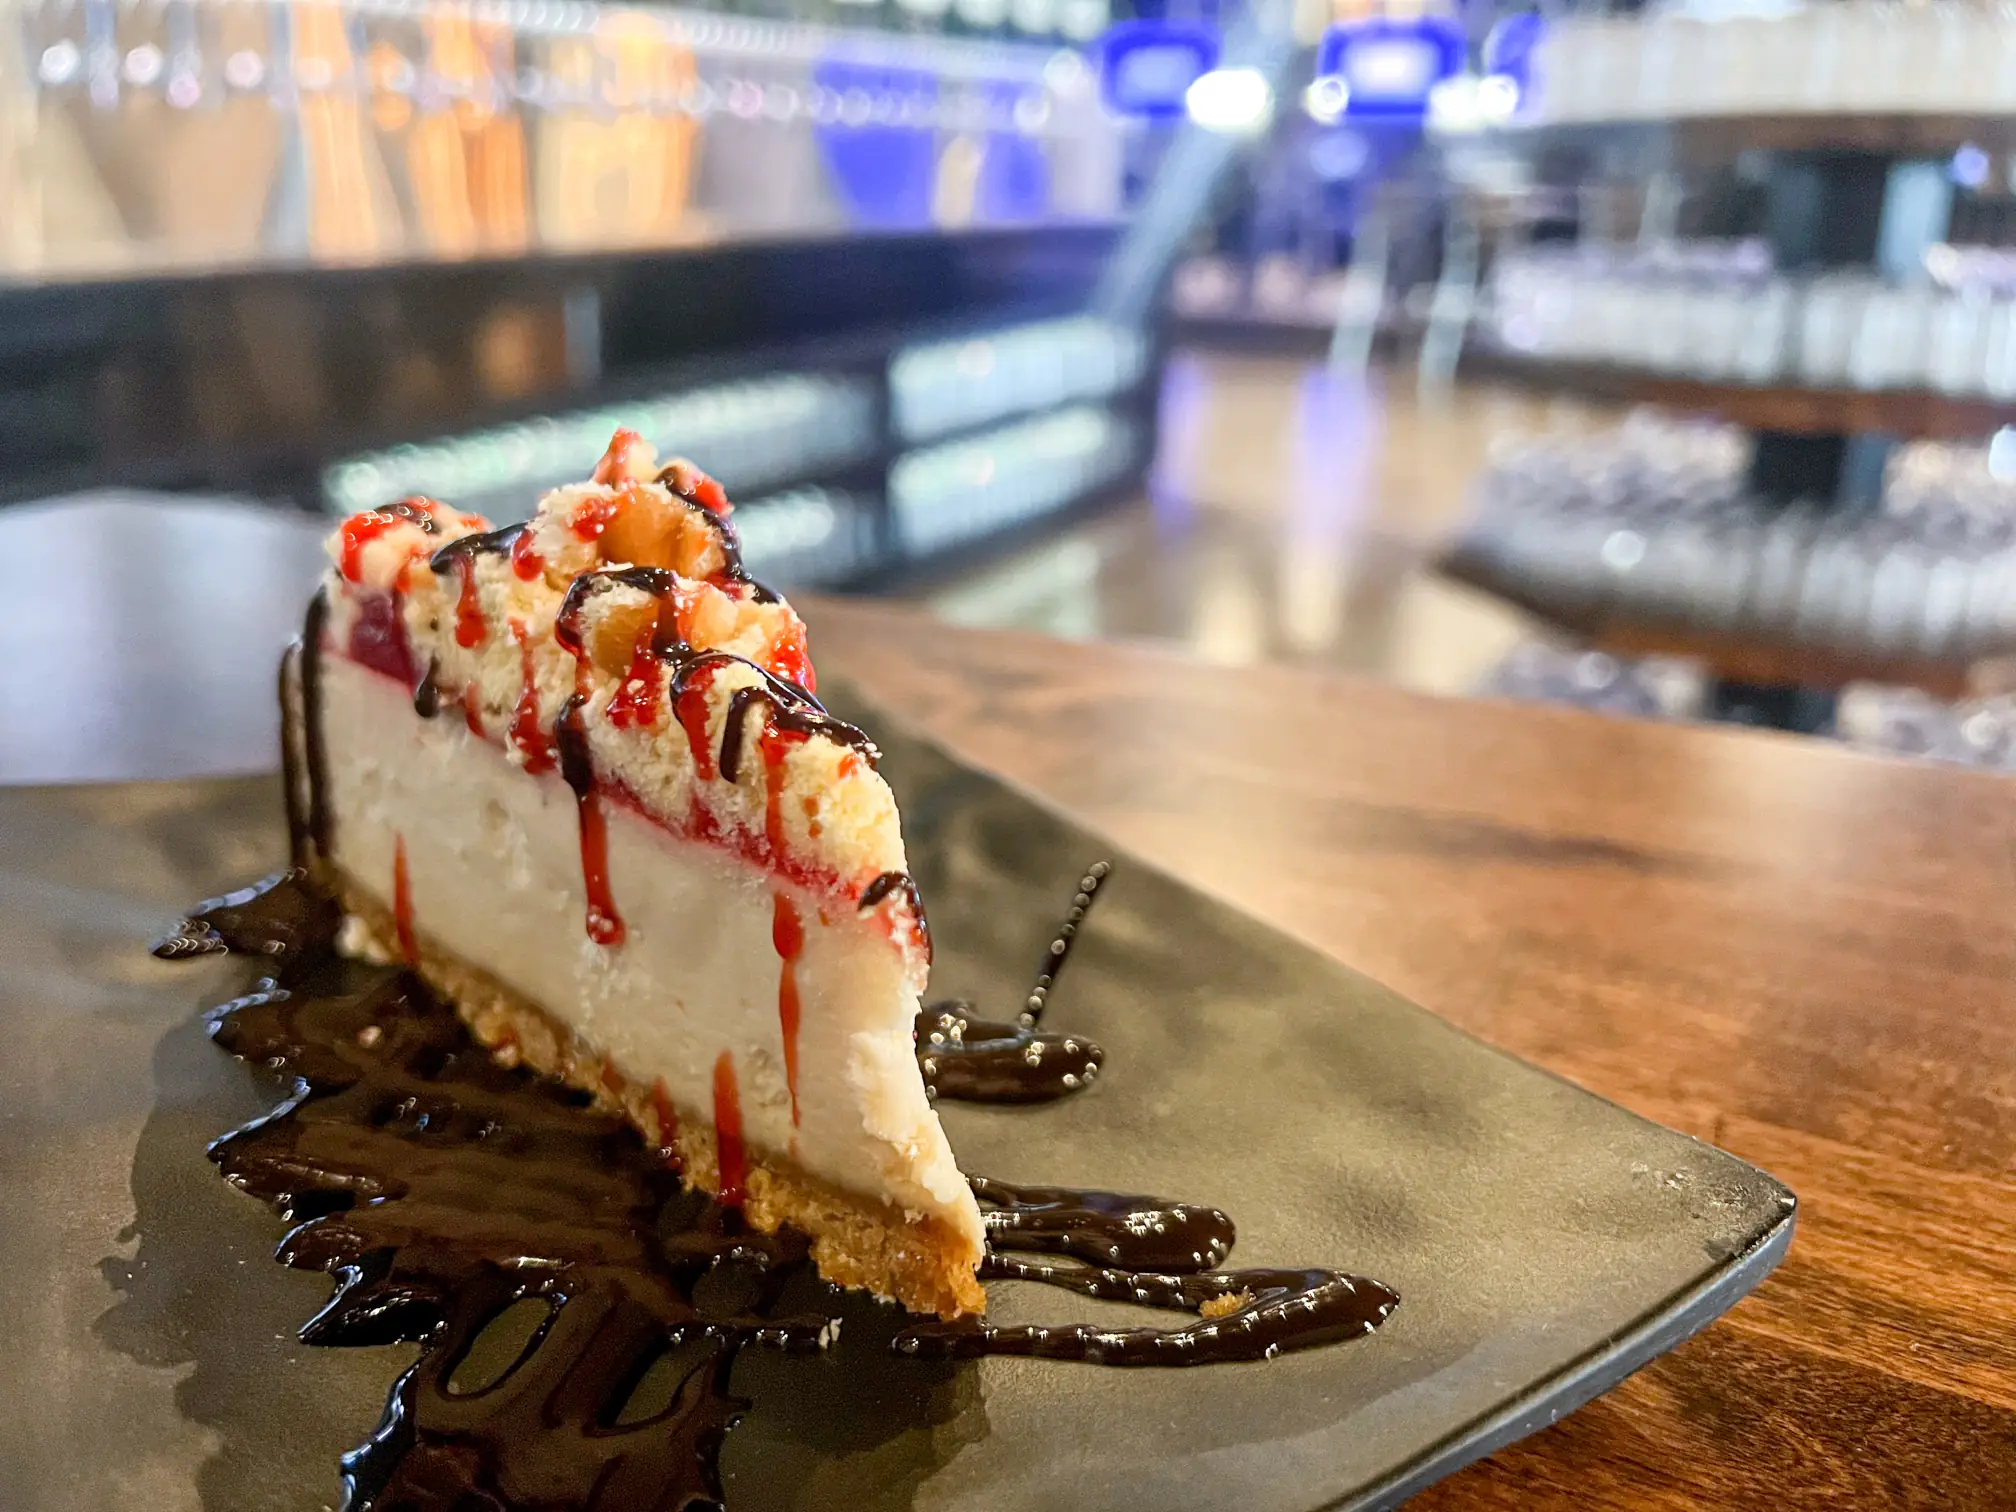 A slice of cheesecake drizzled with sauces.